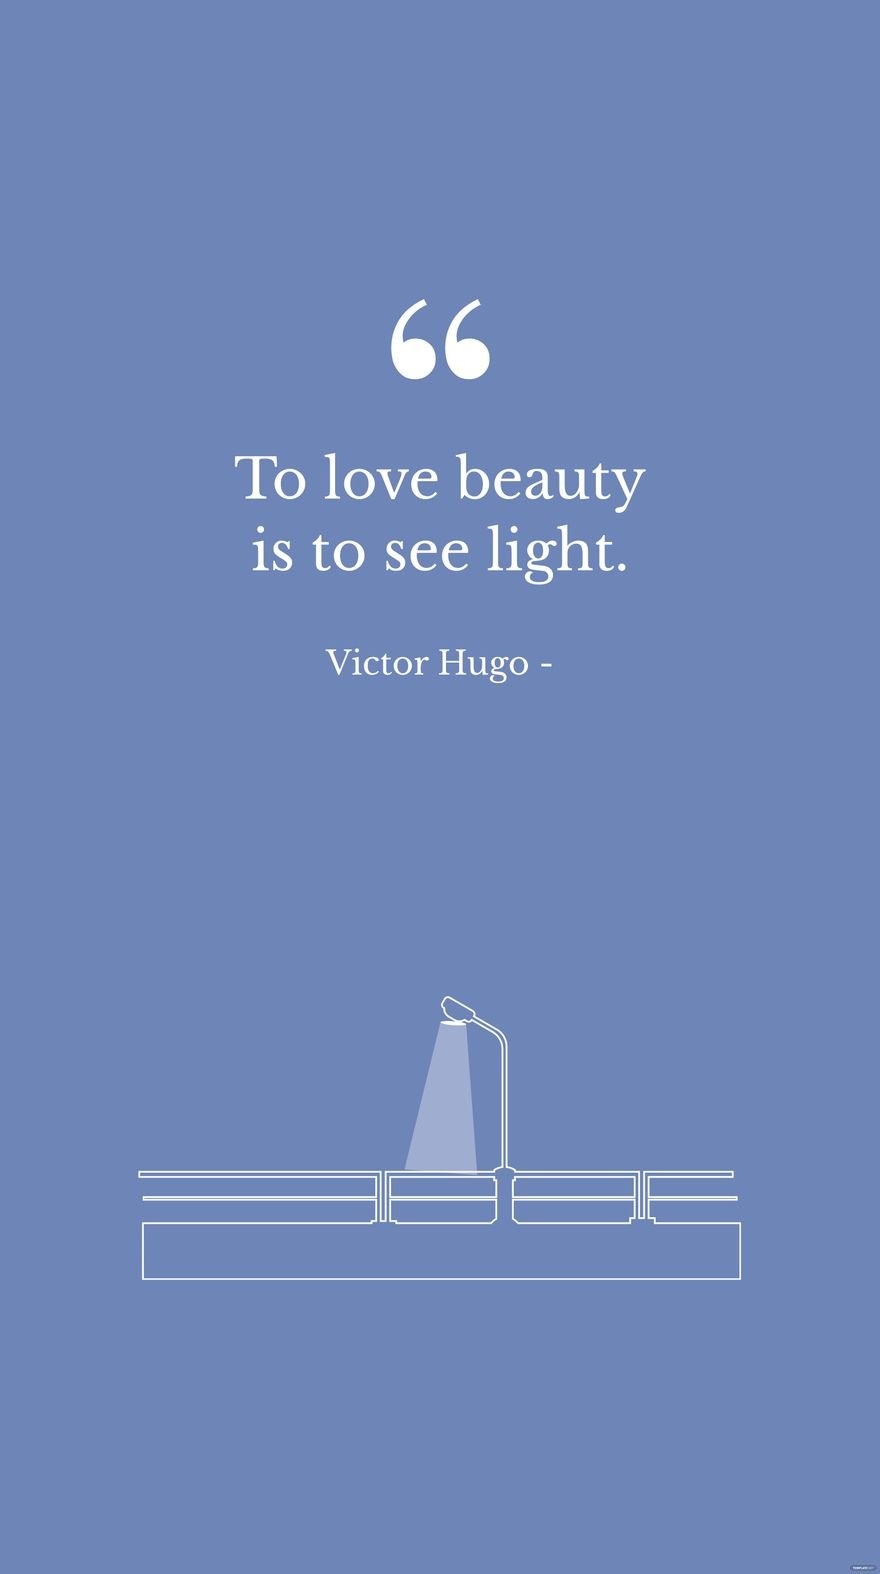 Victor Hugo - To love beauty is to see light.